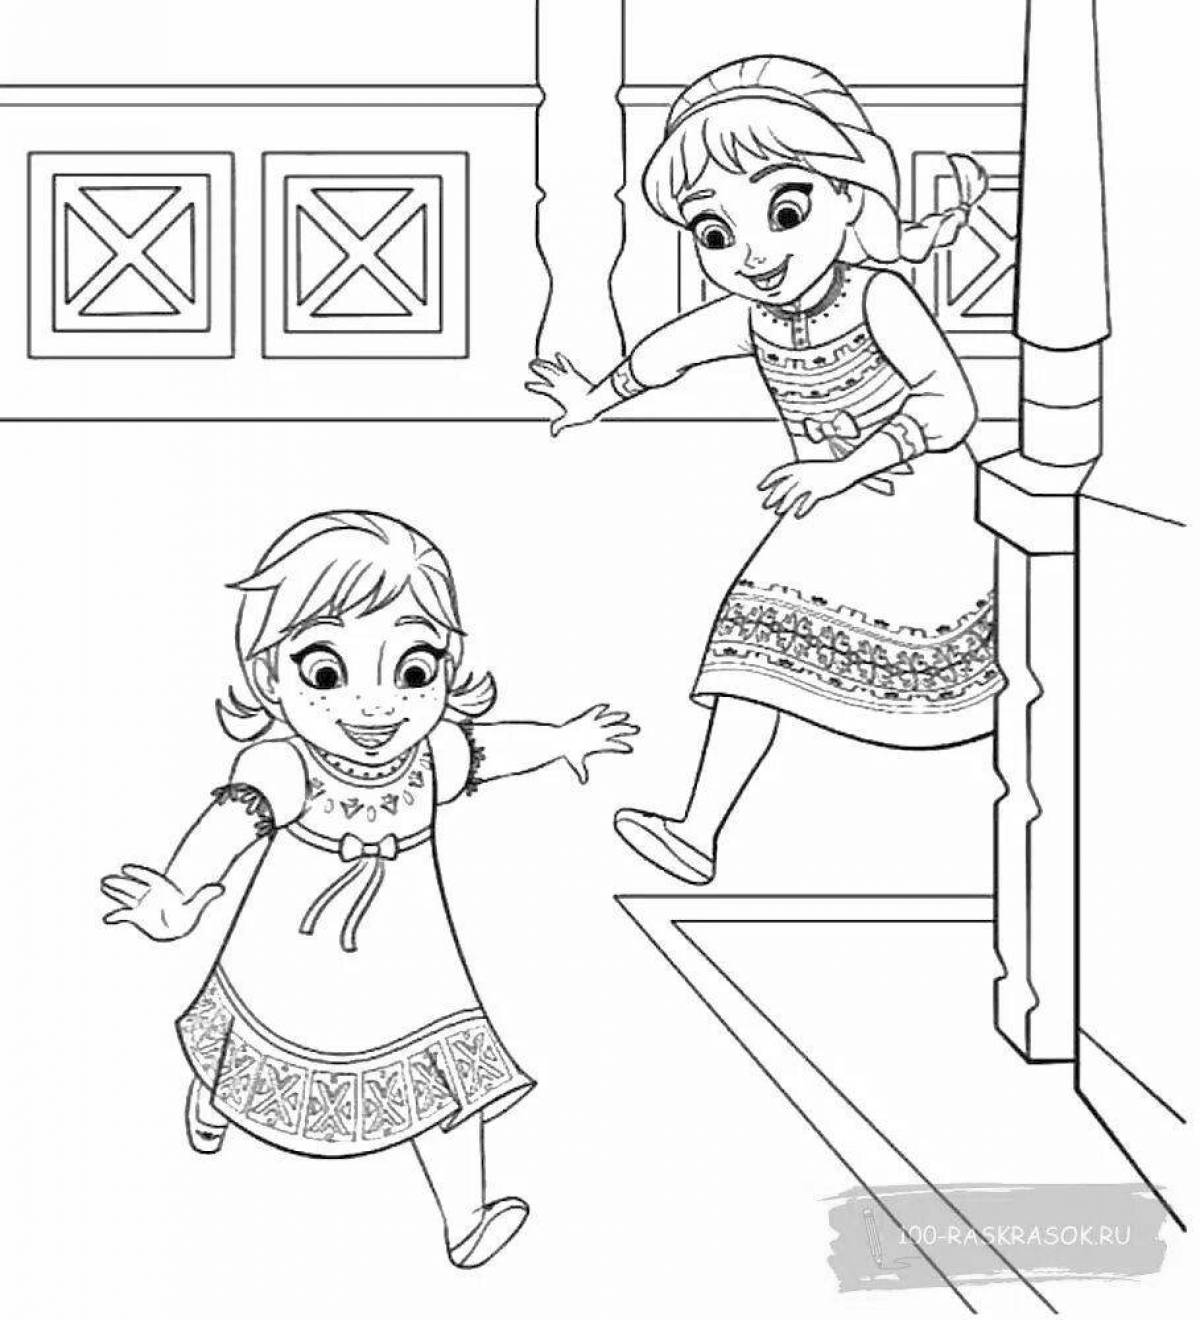 Anna's fun coloring for kids